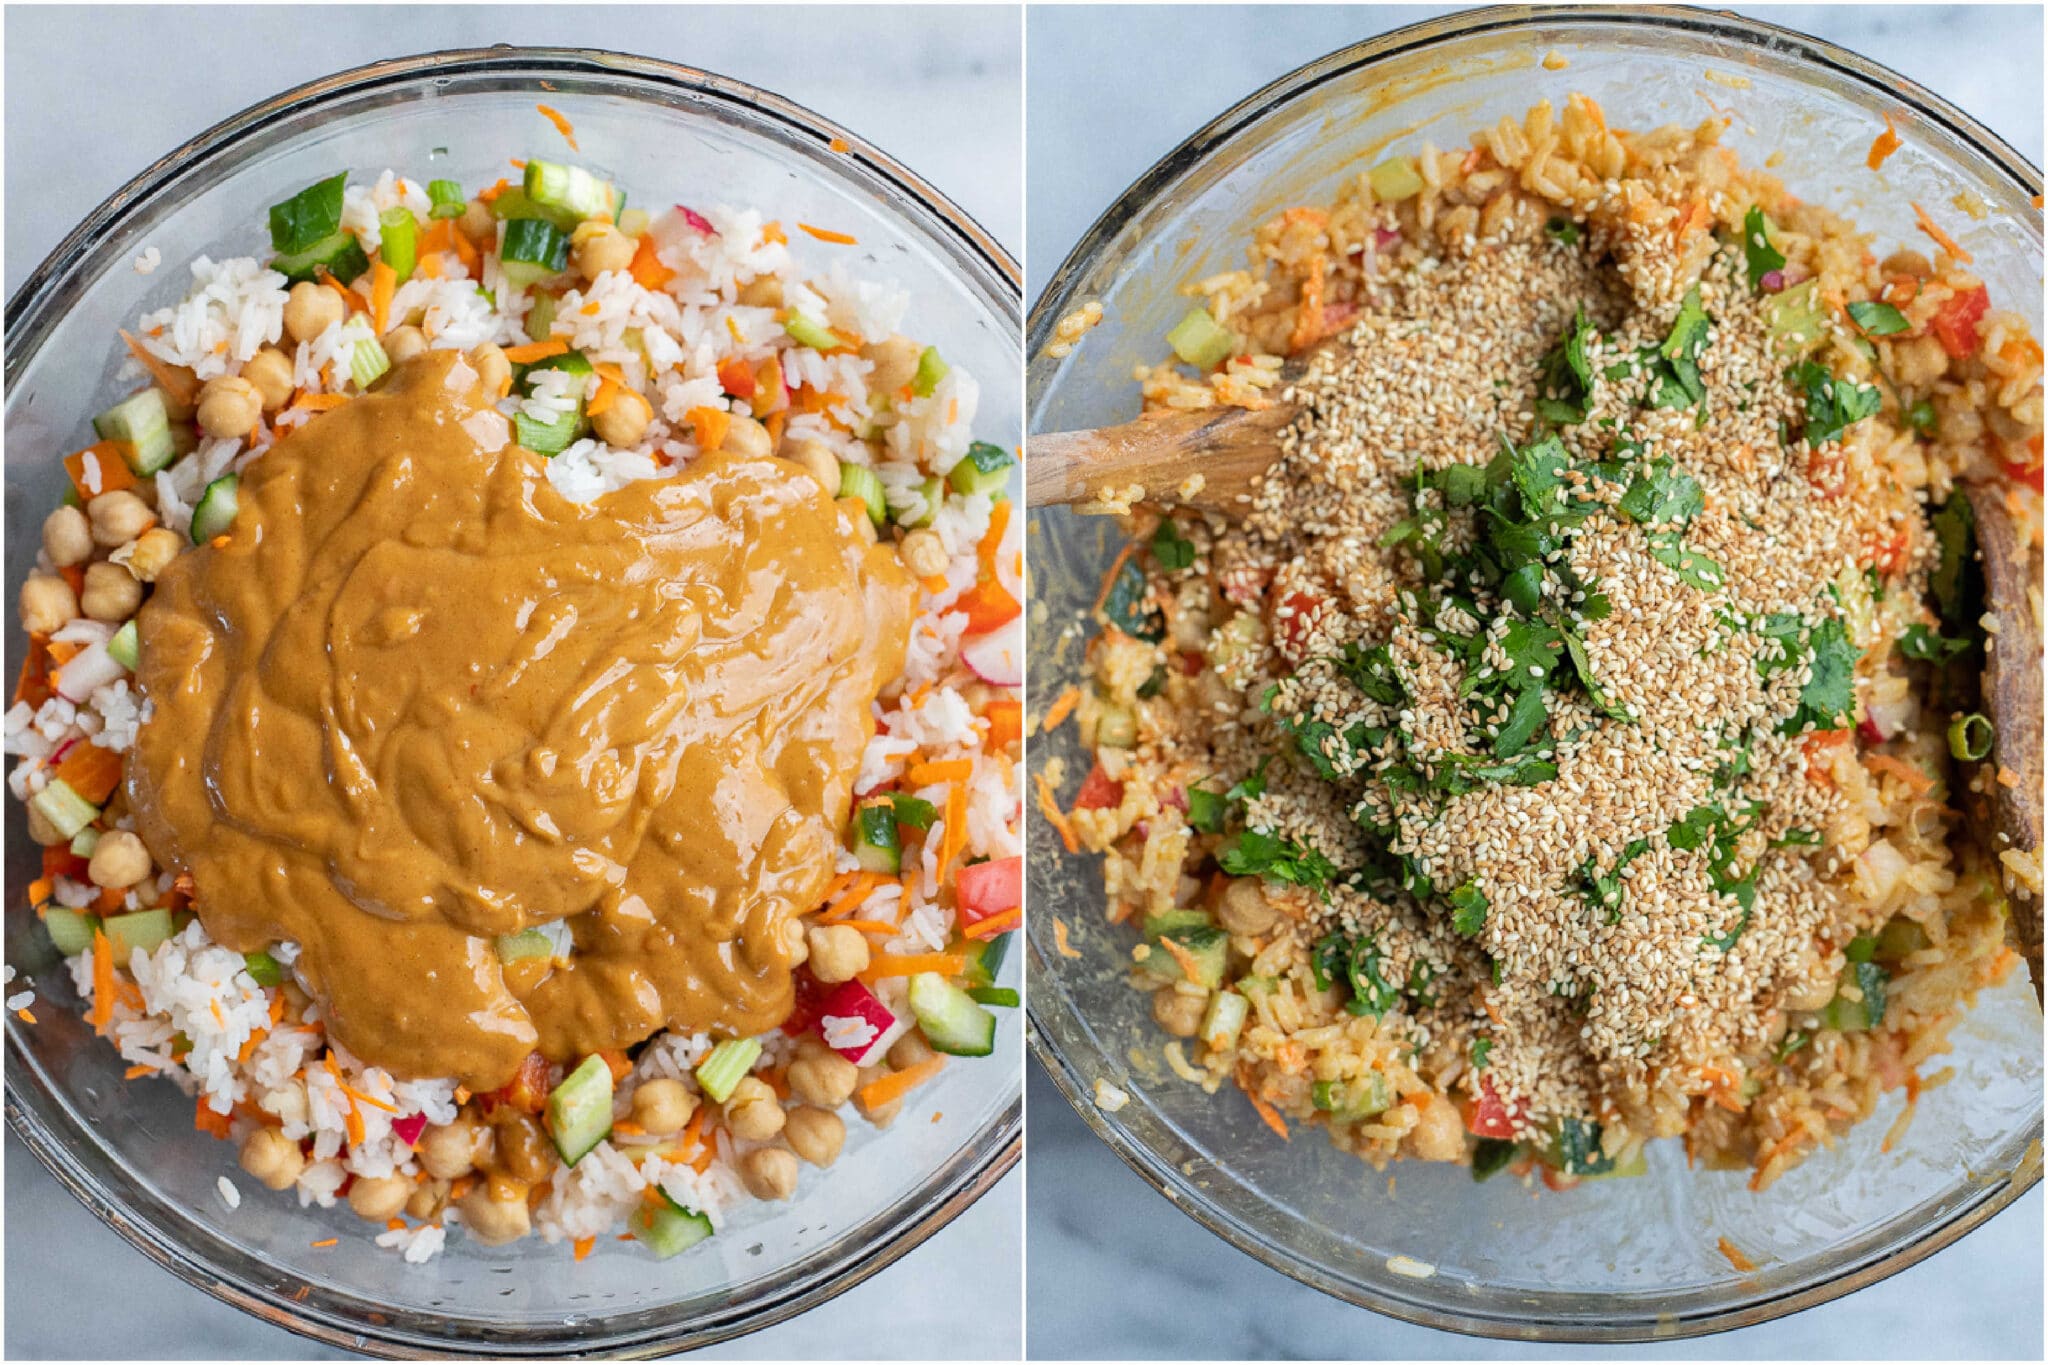 Rice and chickpea salad with an Asian style peanut dressing